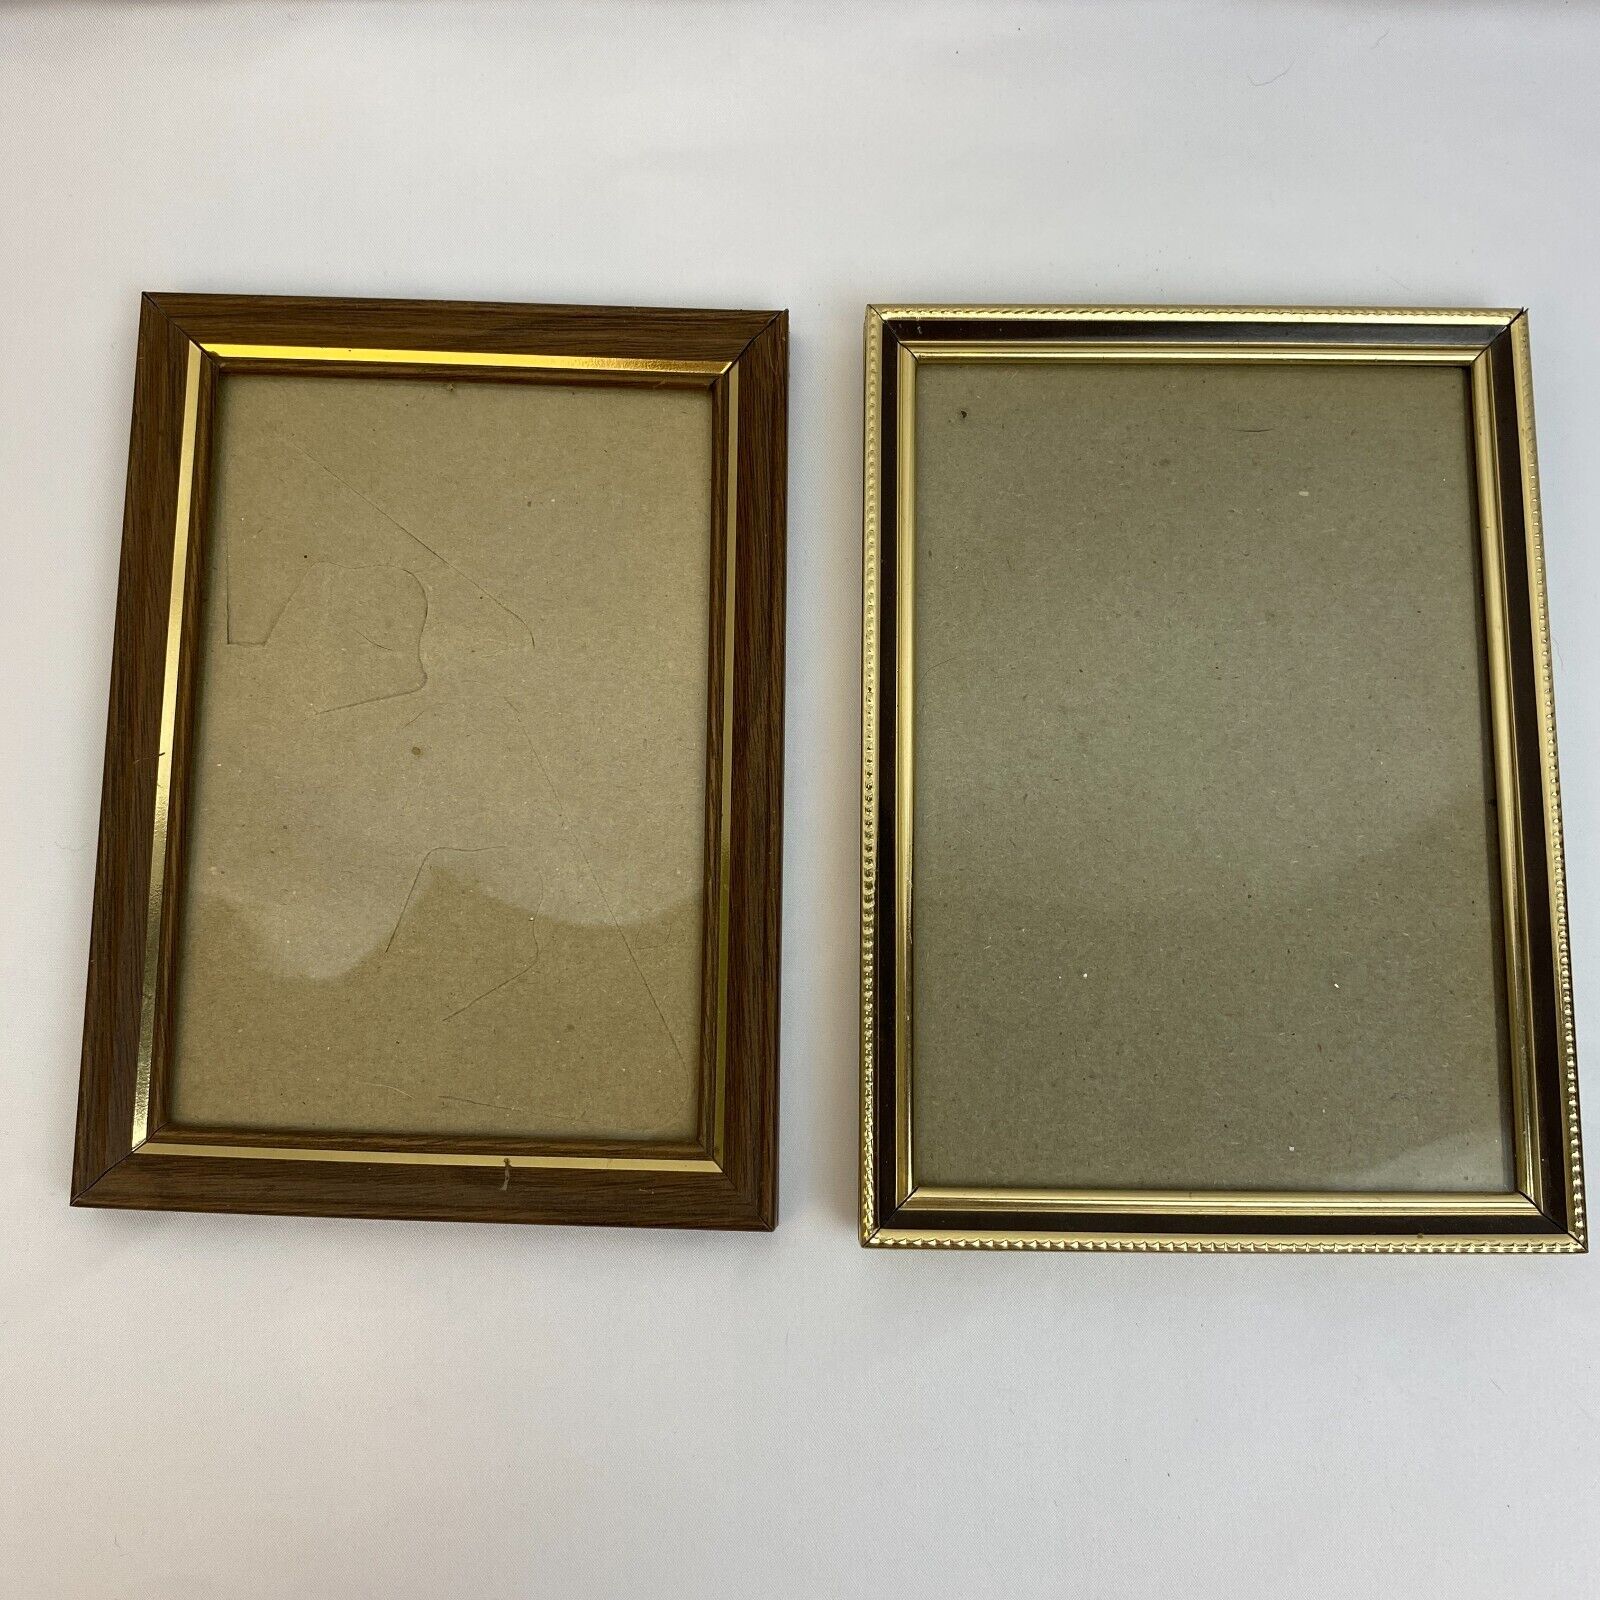 Lot Of 2 Vintage 5x7 Metal Frames With Glass Intact - Very Nice Vintage Frames